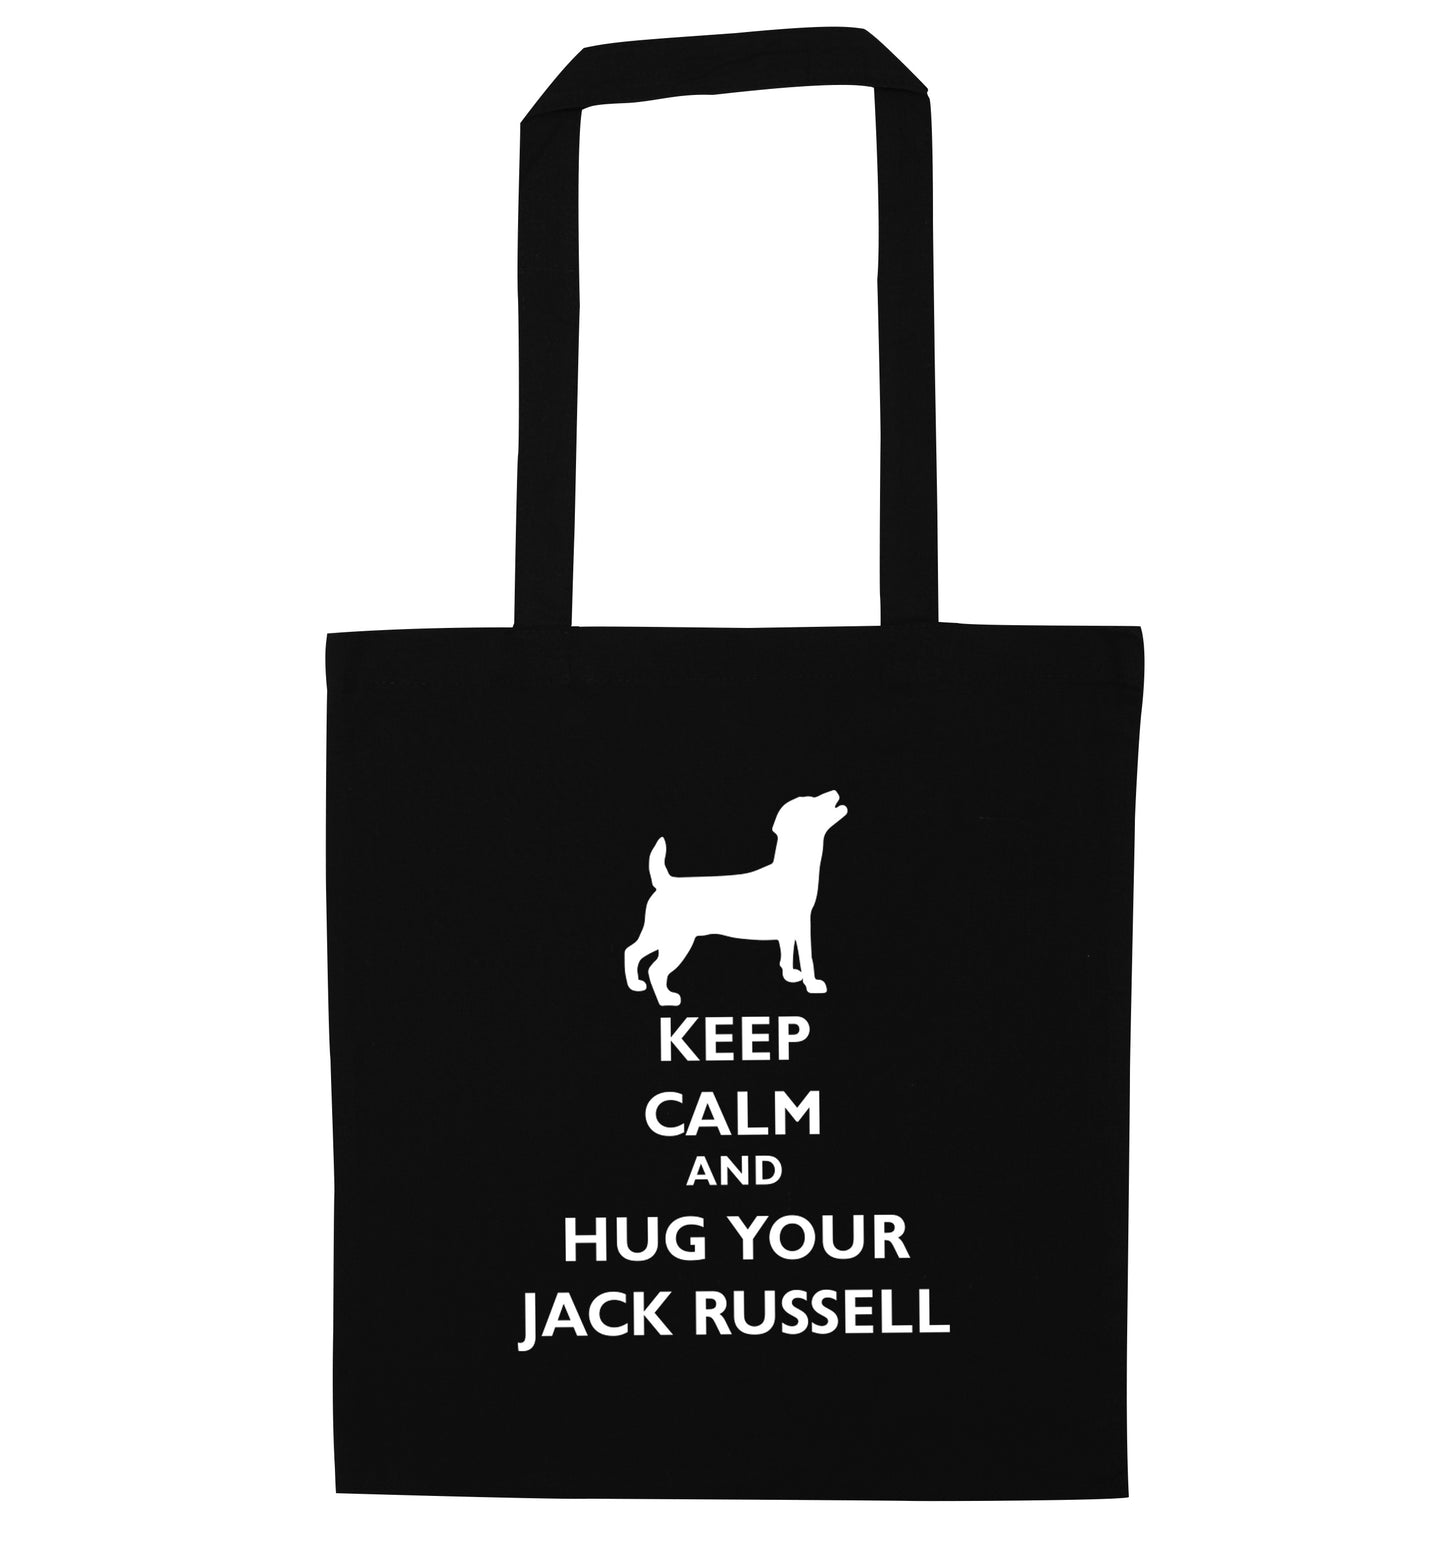 Keep calm and hug your jack russell black tote bag